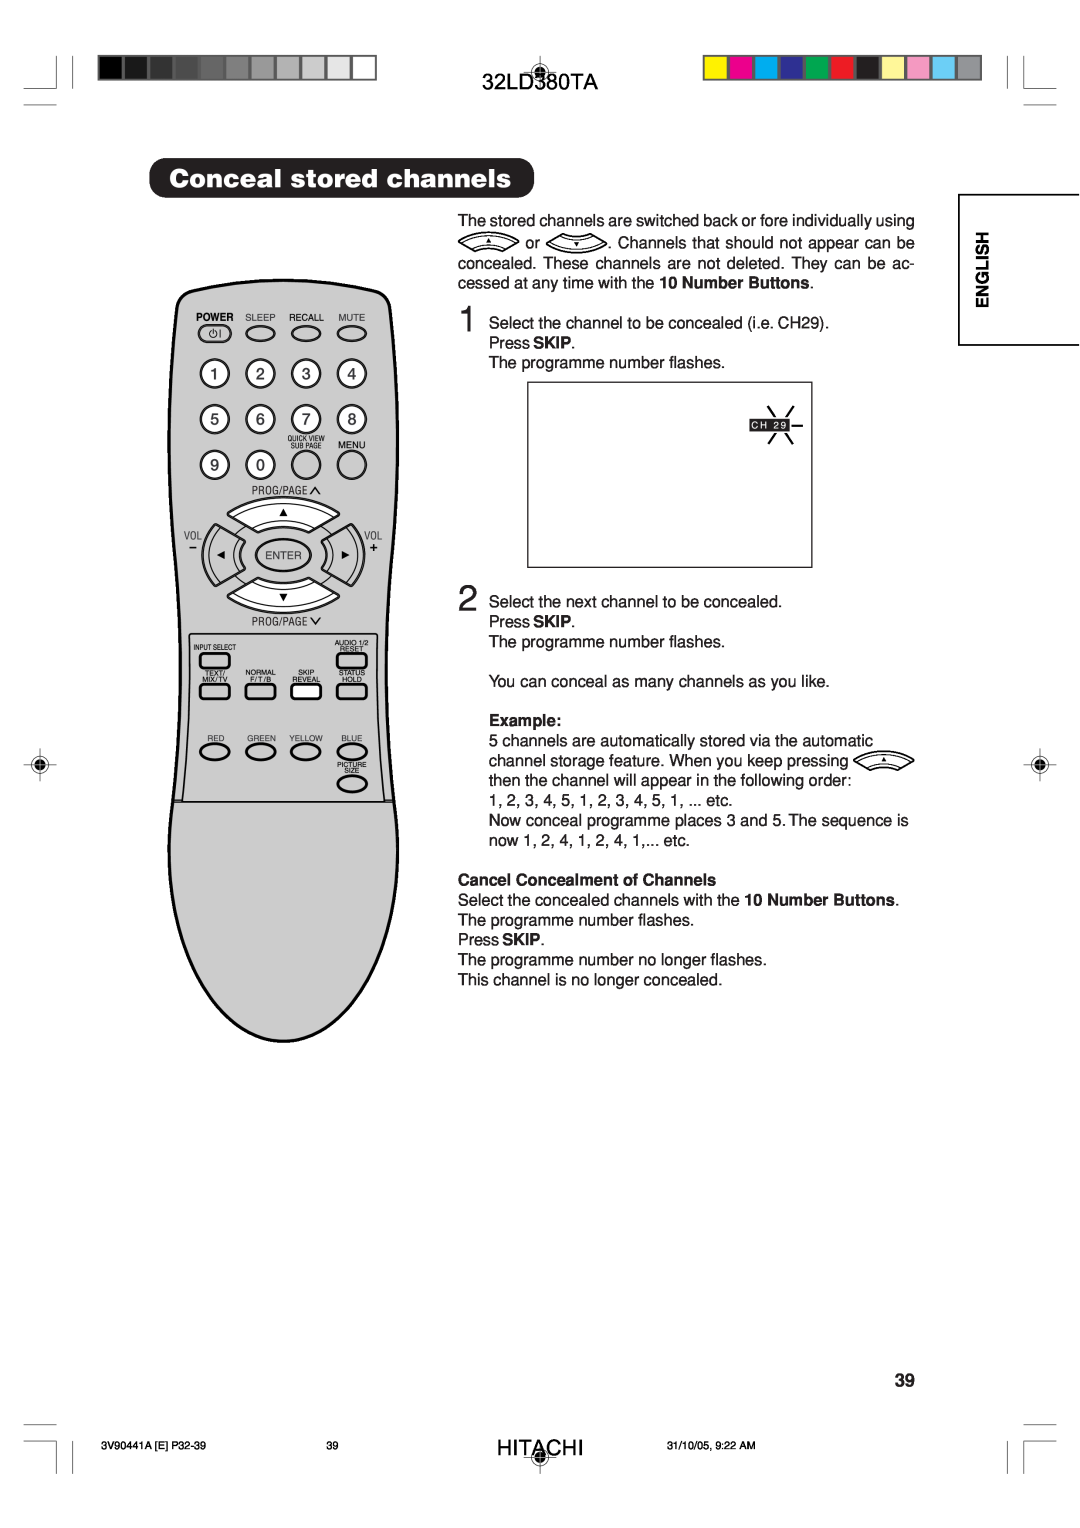 Hitachi 32LD380TA user manual Conceal stored channels, Cancel Concealment of Channels, Hitachi, English, Example 